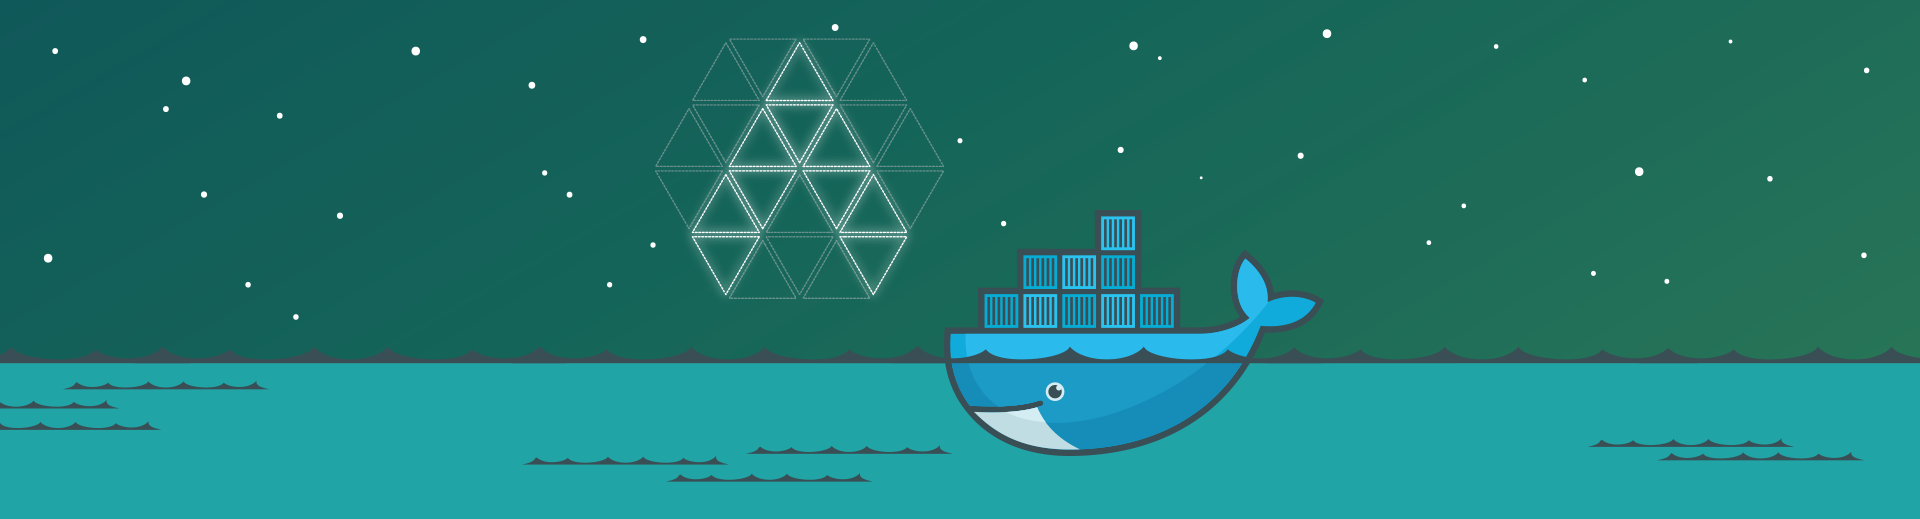 The Docker whale swimming at night with the Apache Aurora logo made up of stars